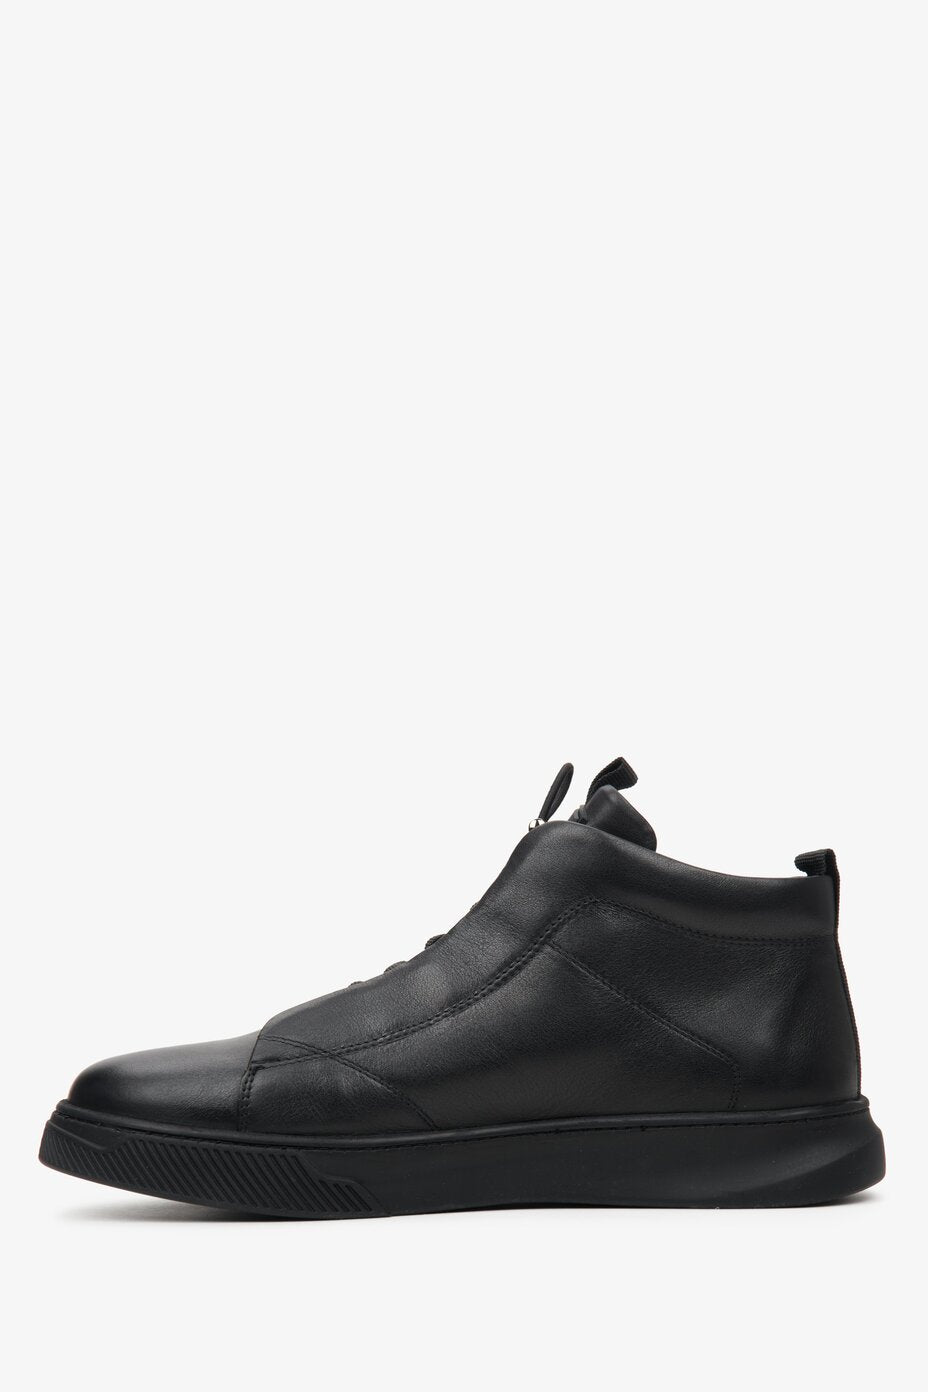 Elevated men's ankle boots by Estro in black made of genuine leather - shoe profile.